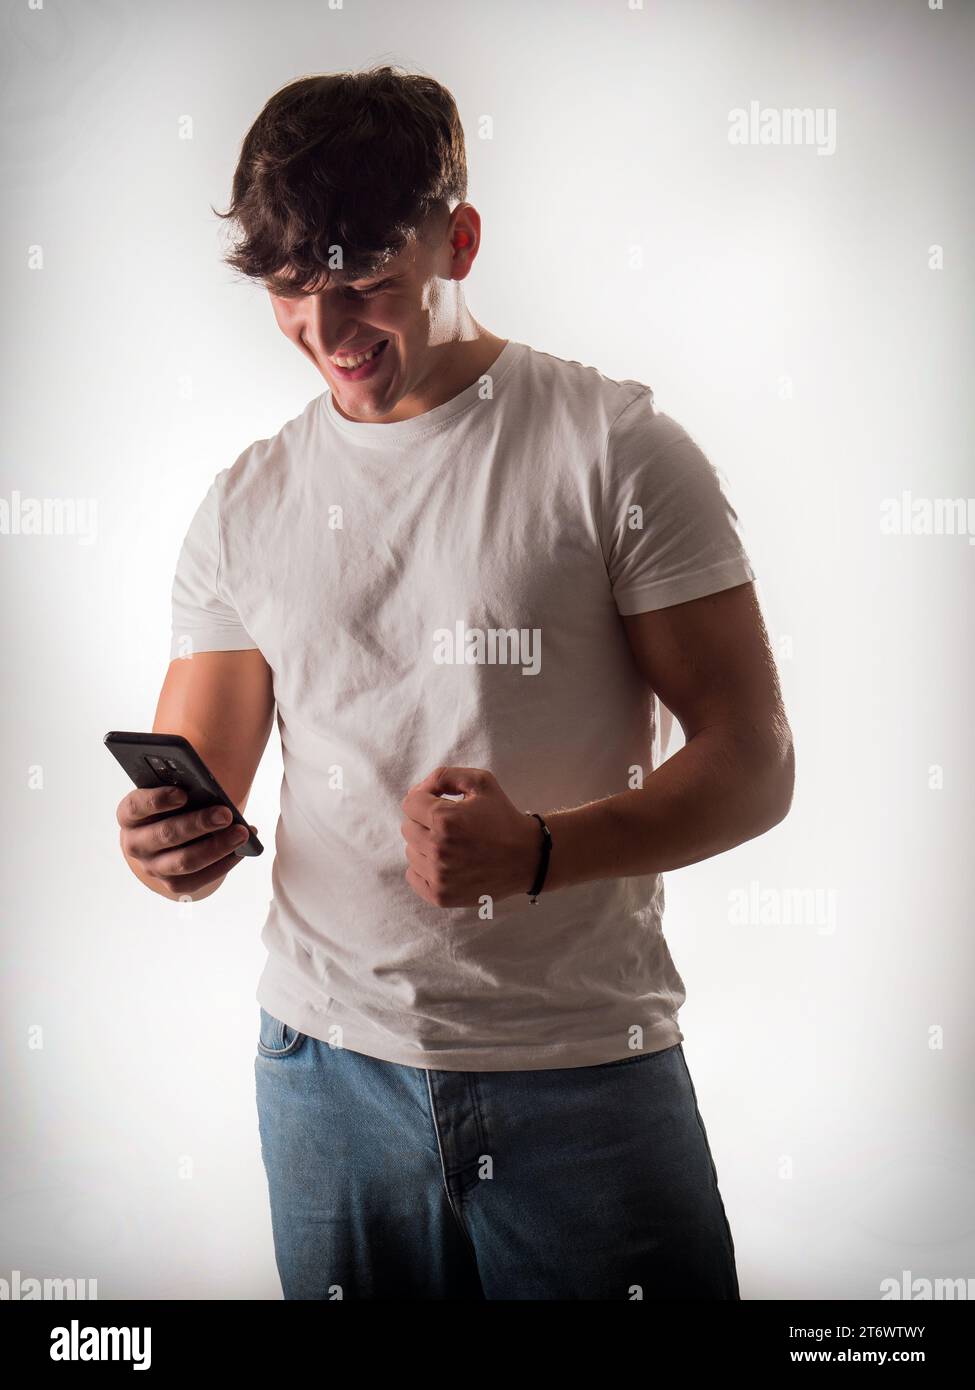 A man laughing while holding a cell phone. A Joyful Moment Captured: A Handsome Man Laughing With a Cell Phone in a Studio Setting Stock Photo